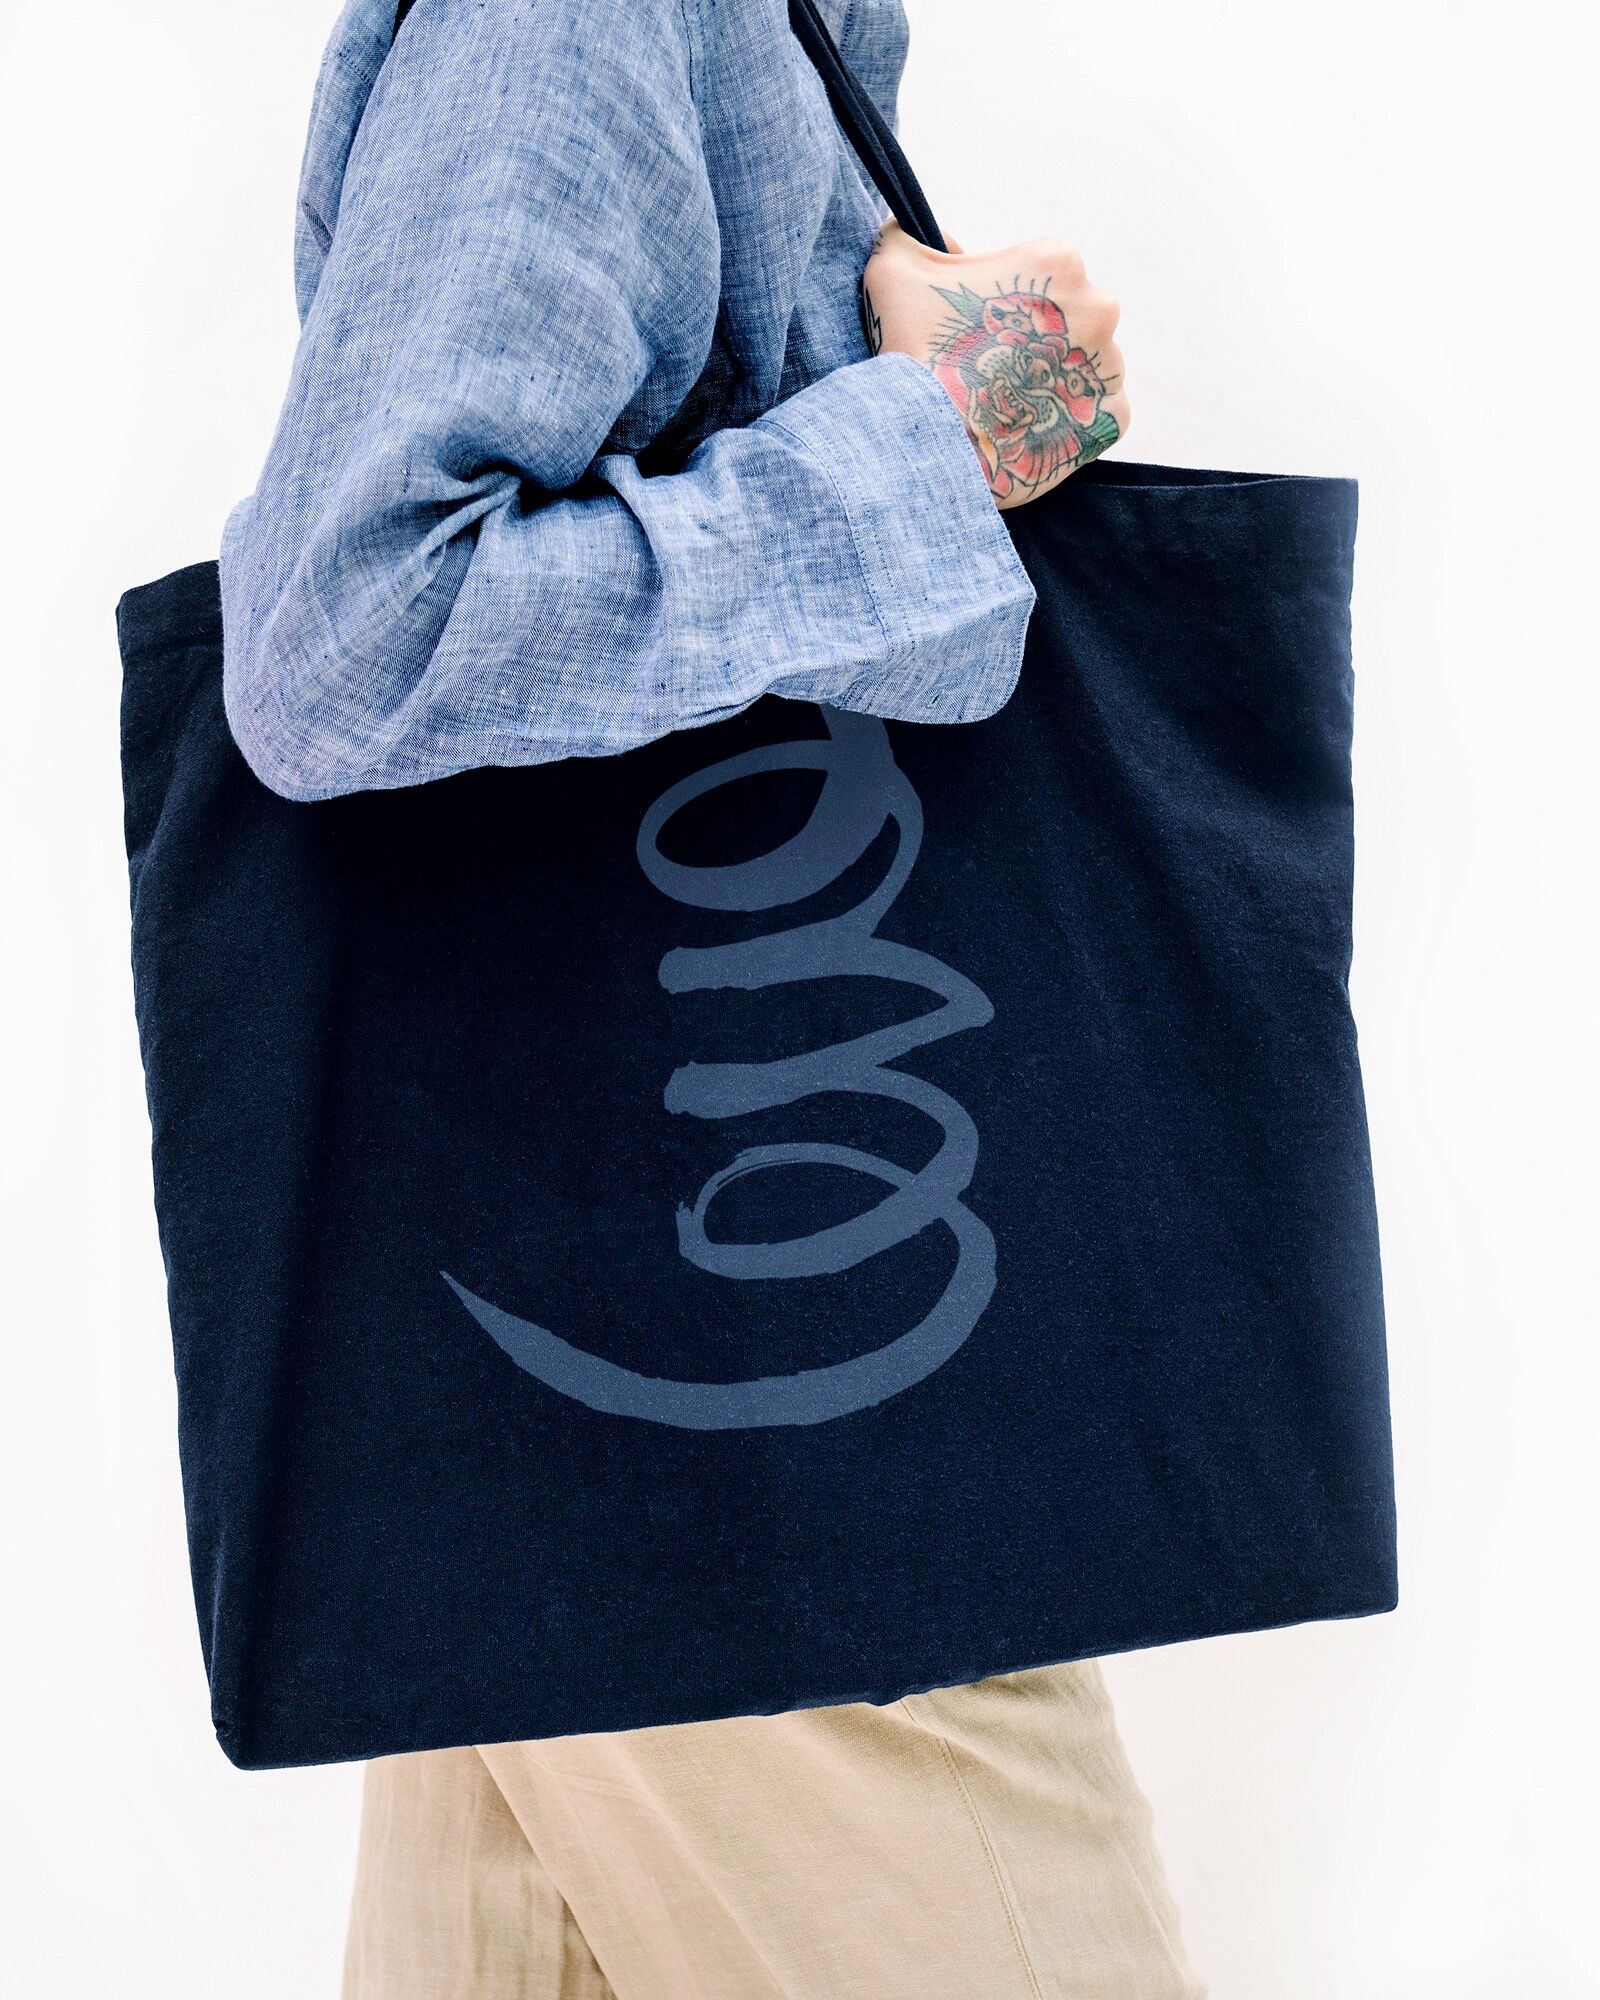 Tattooed Woman In A Blue Linen Shirt Holding A Black Tote Bag Mockup